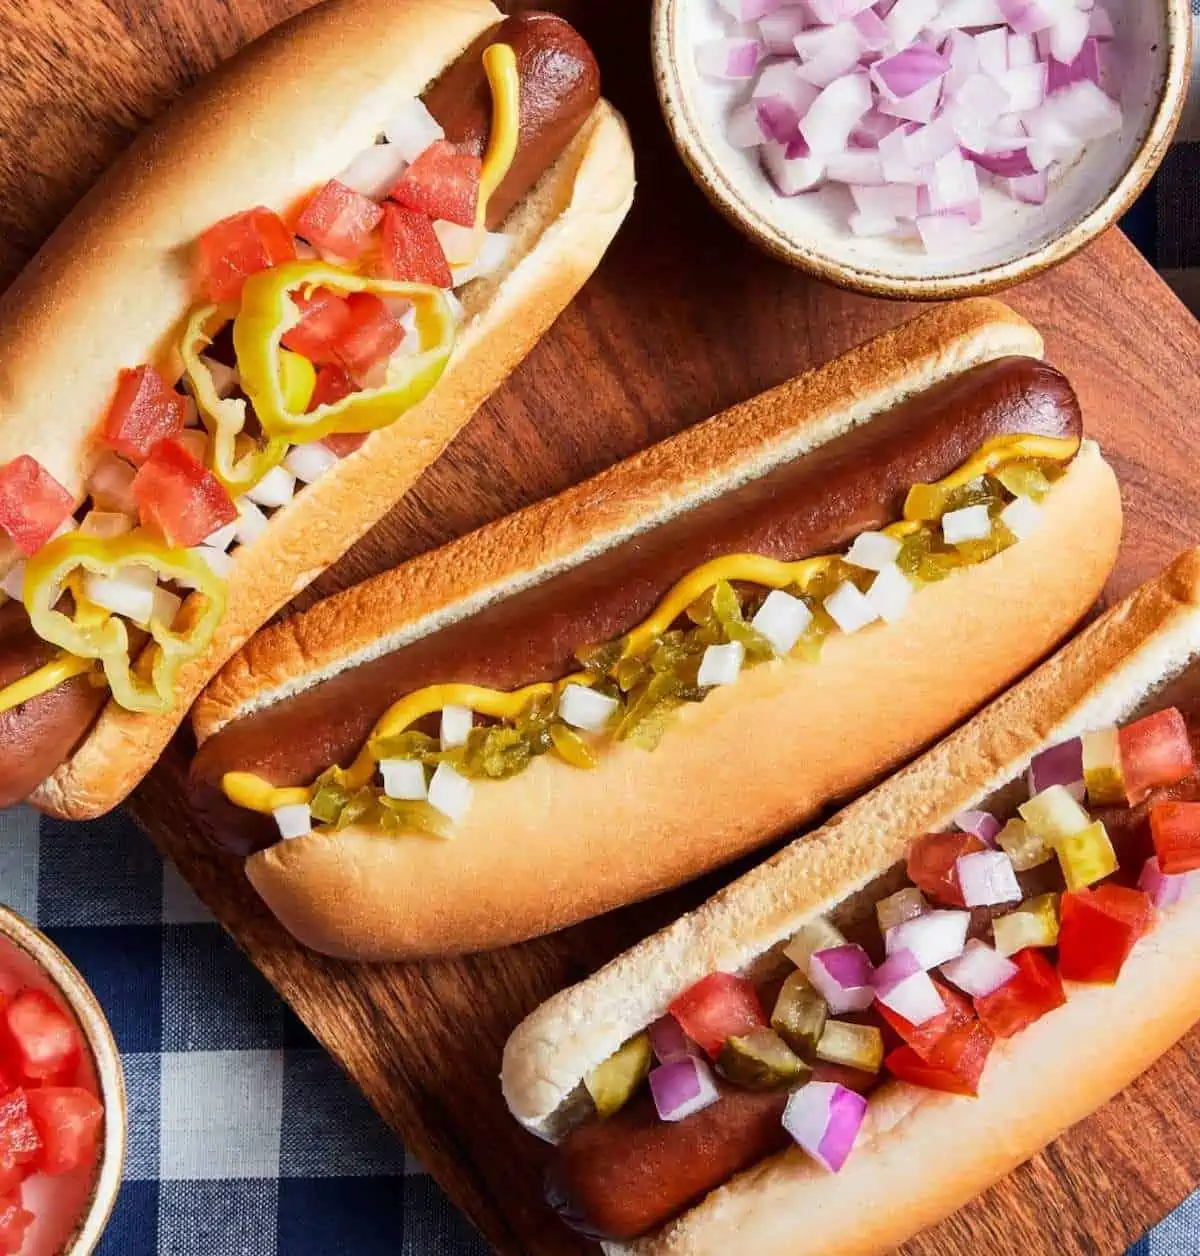 Three Field Roast hot dogs in buns with various toppings.